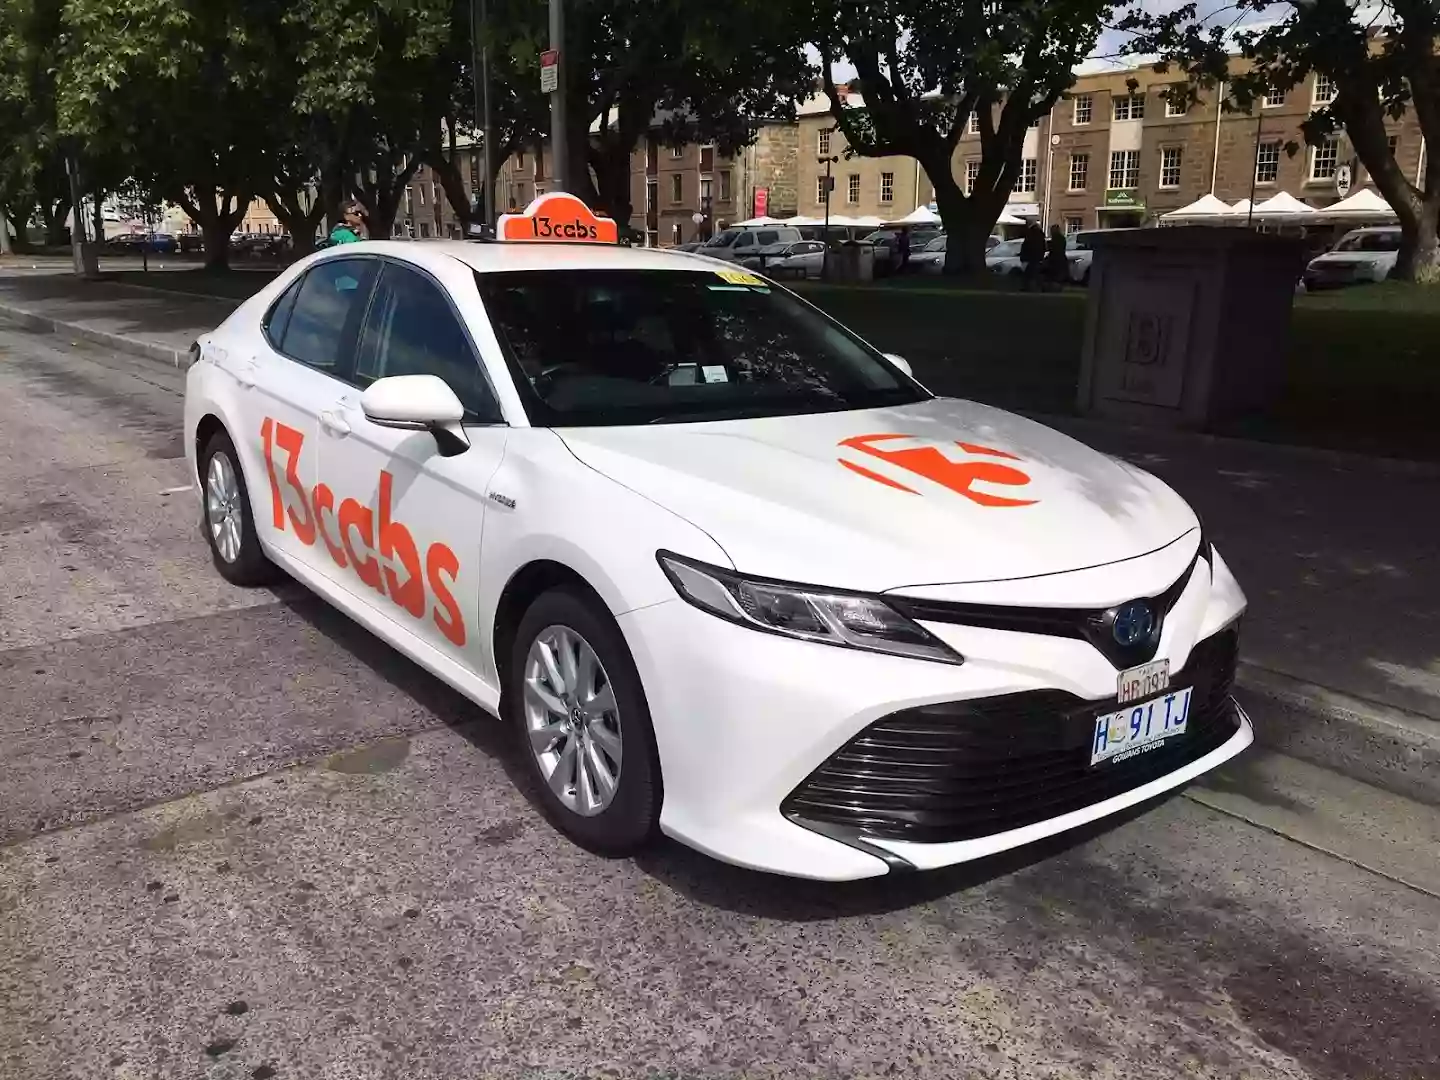 13CABS Driver Academy